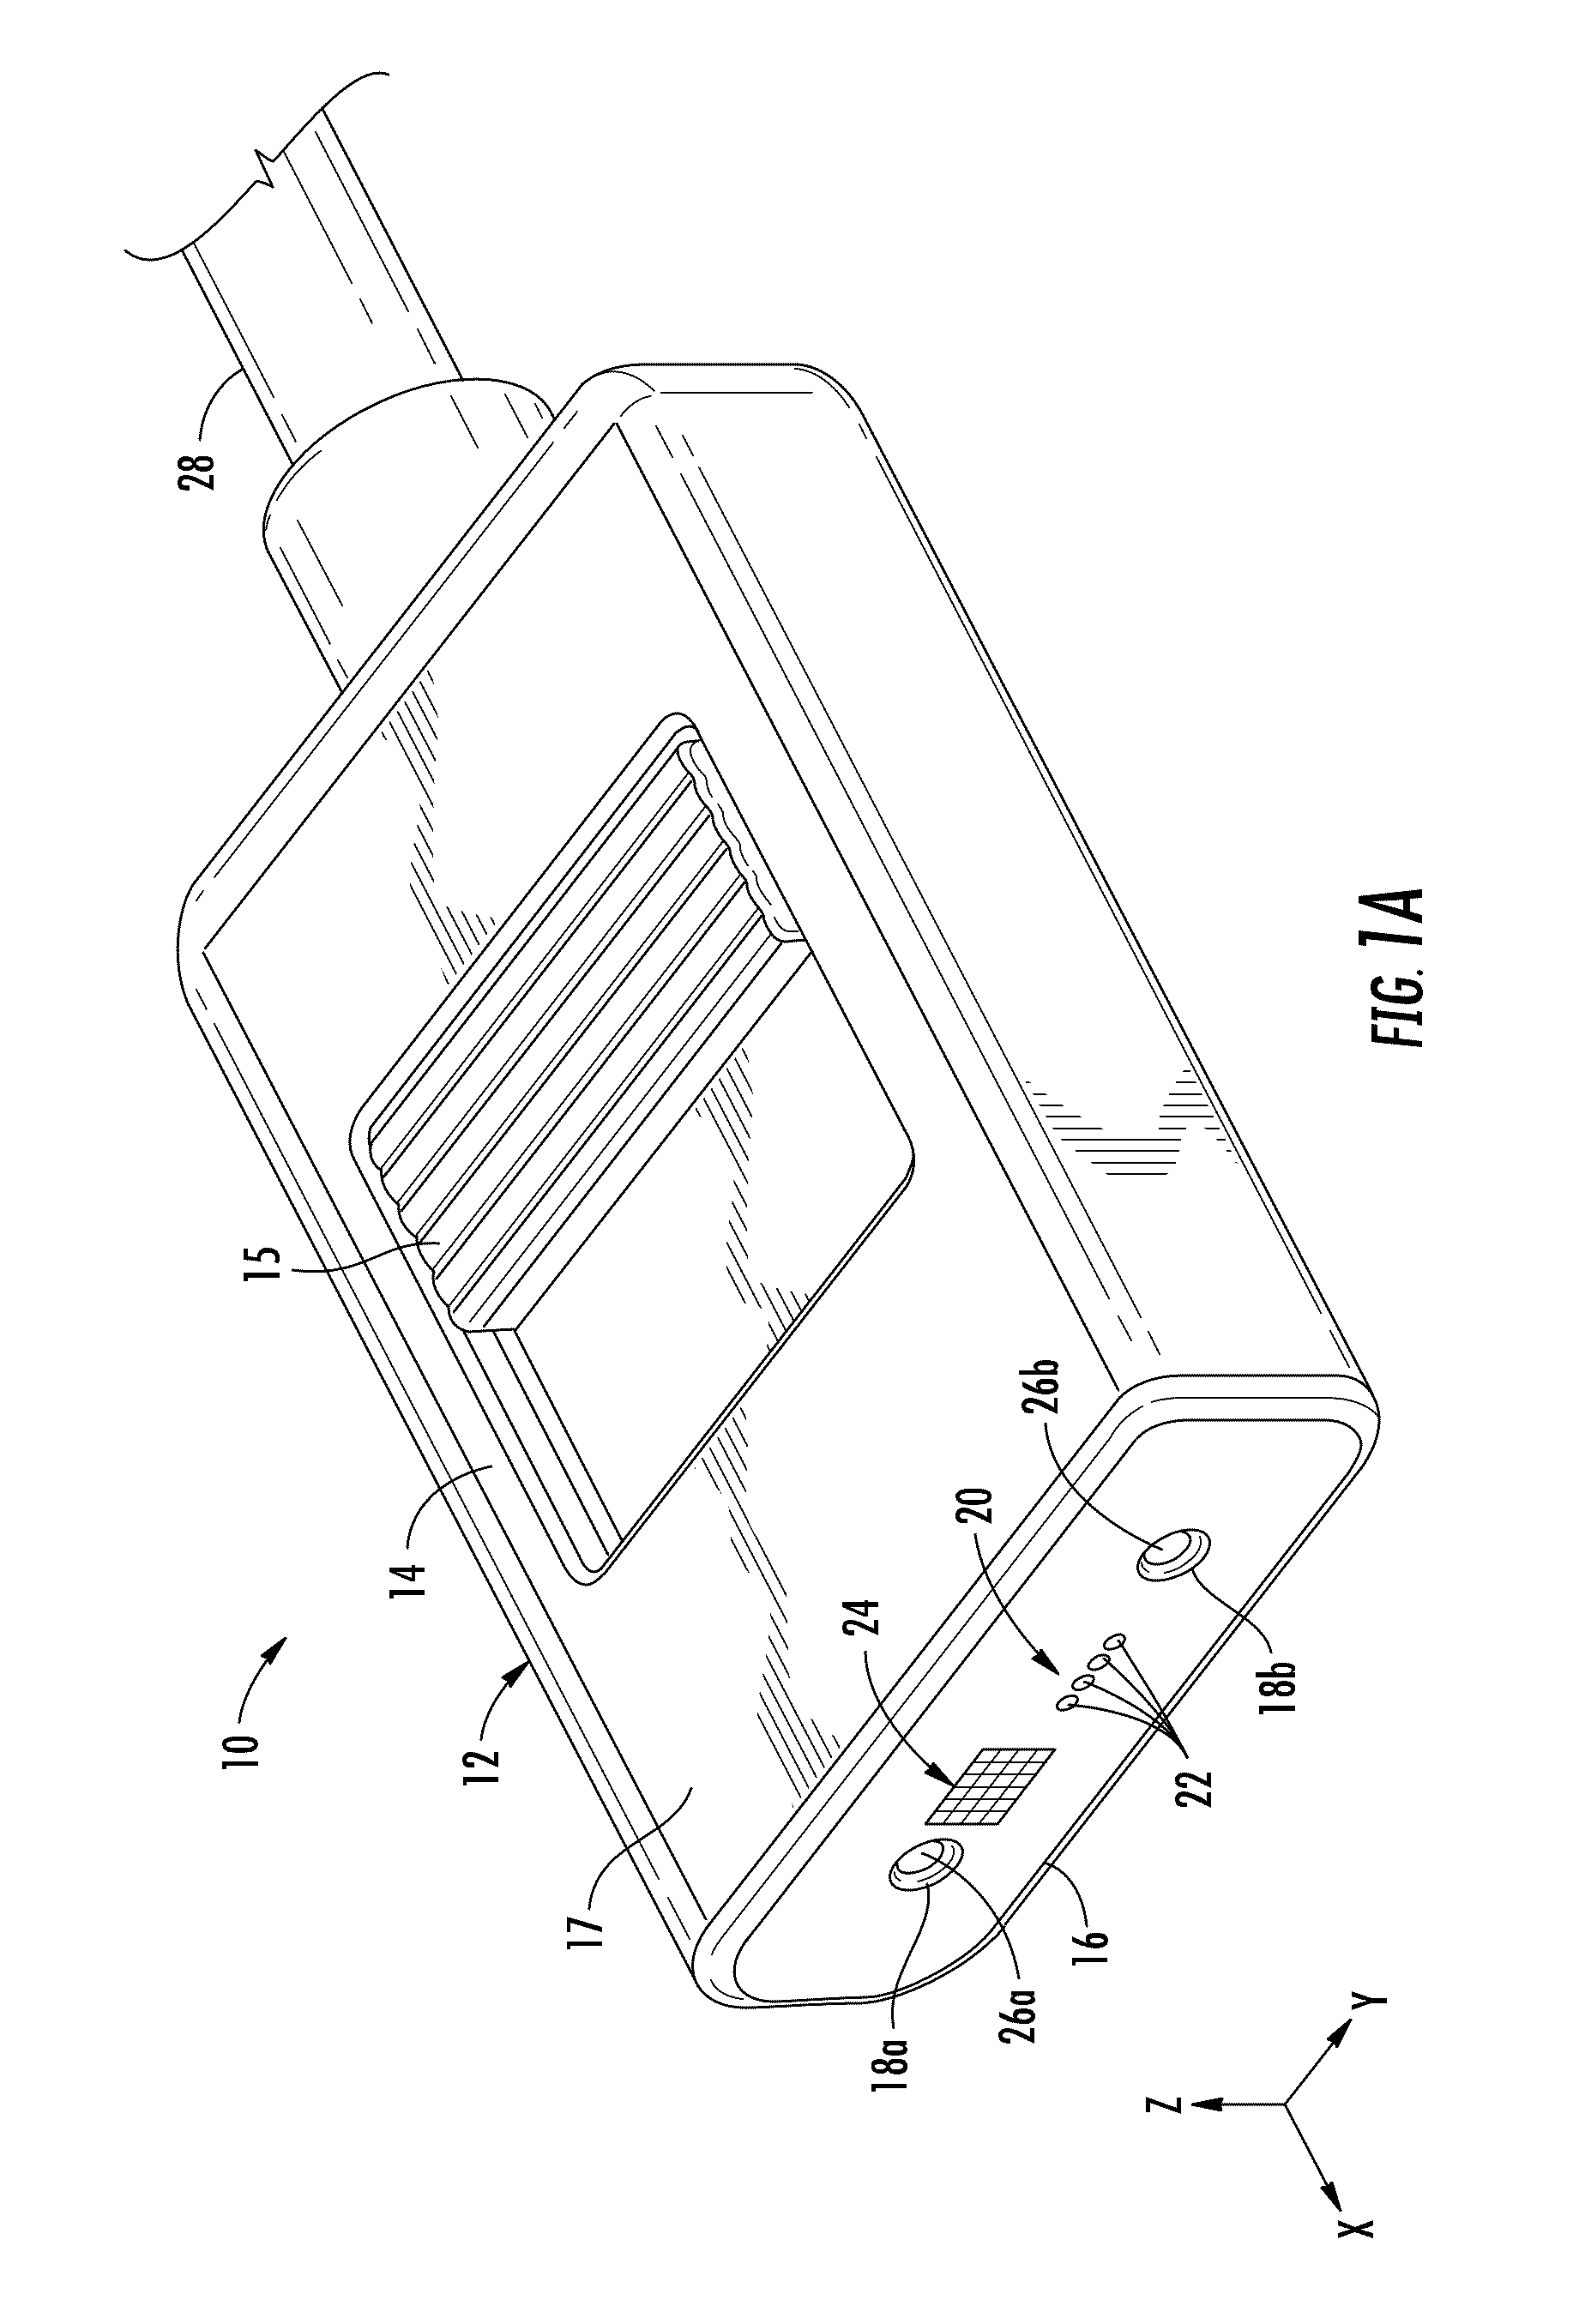 Optical connector assemblies having alignment components